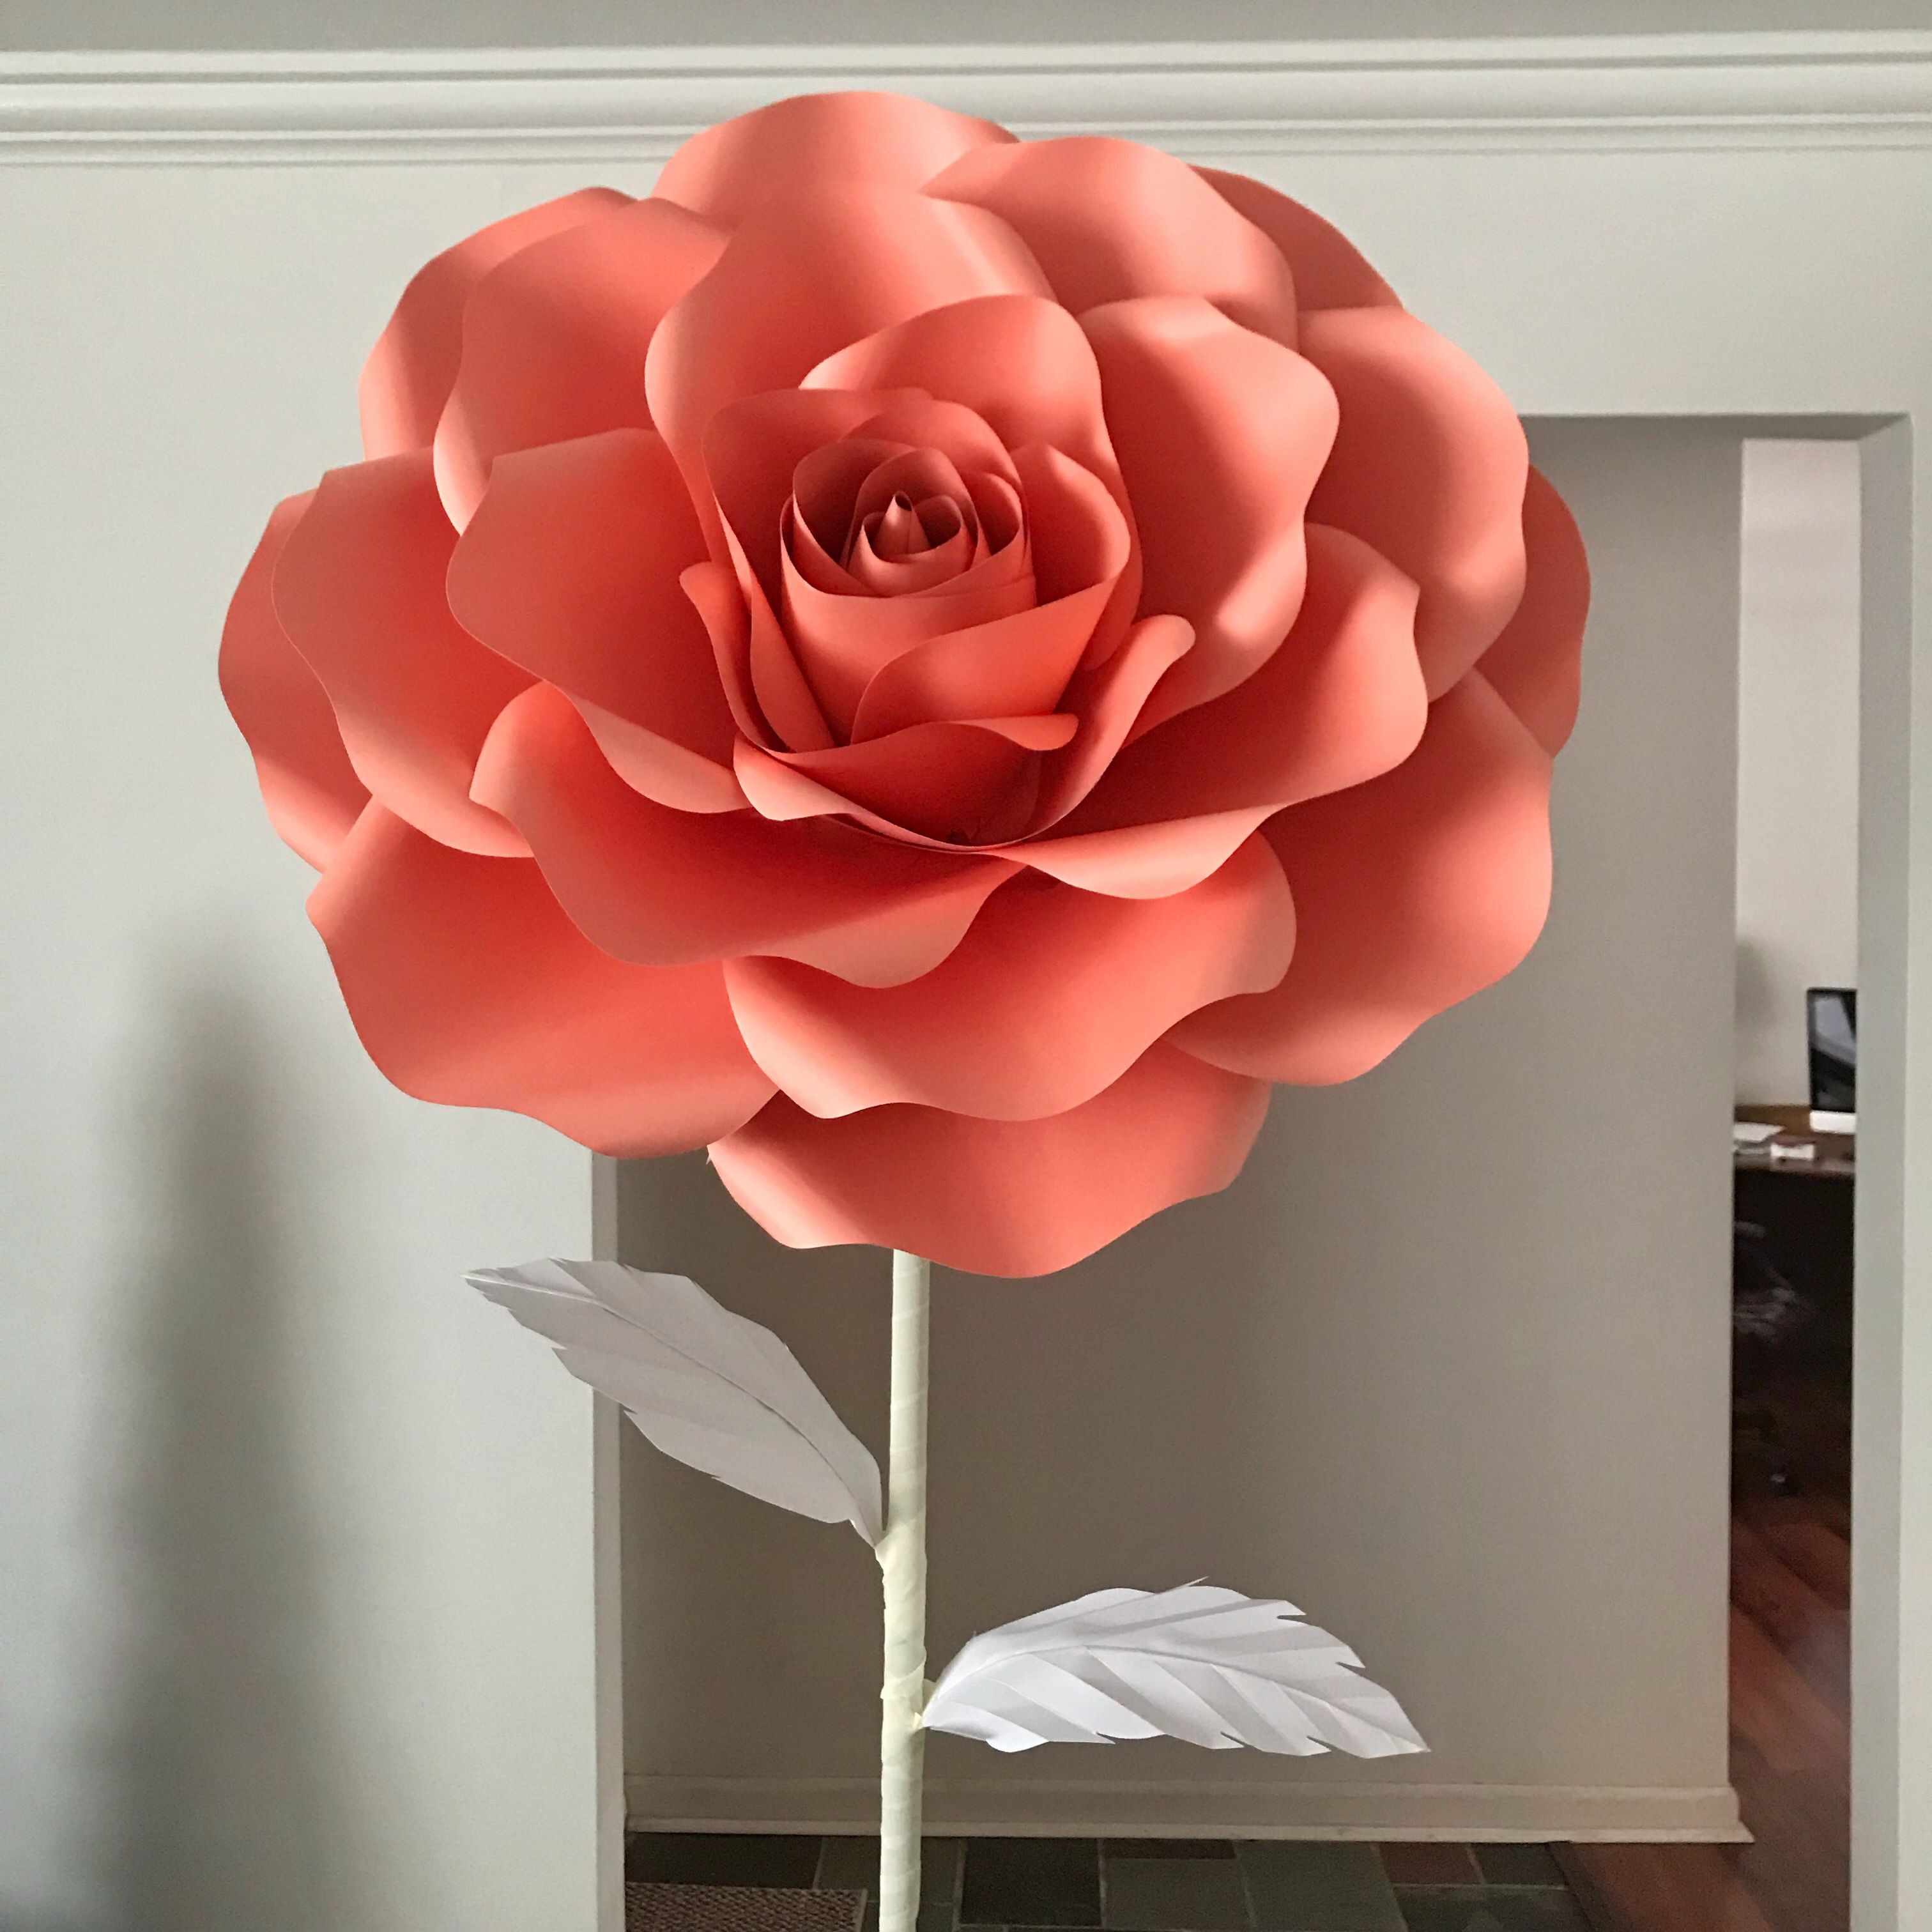 Rose Papercraft Our Free Standing Extra Rose Flowers Pinterest